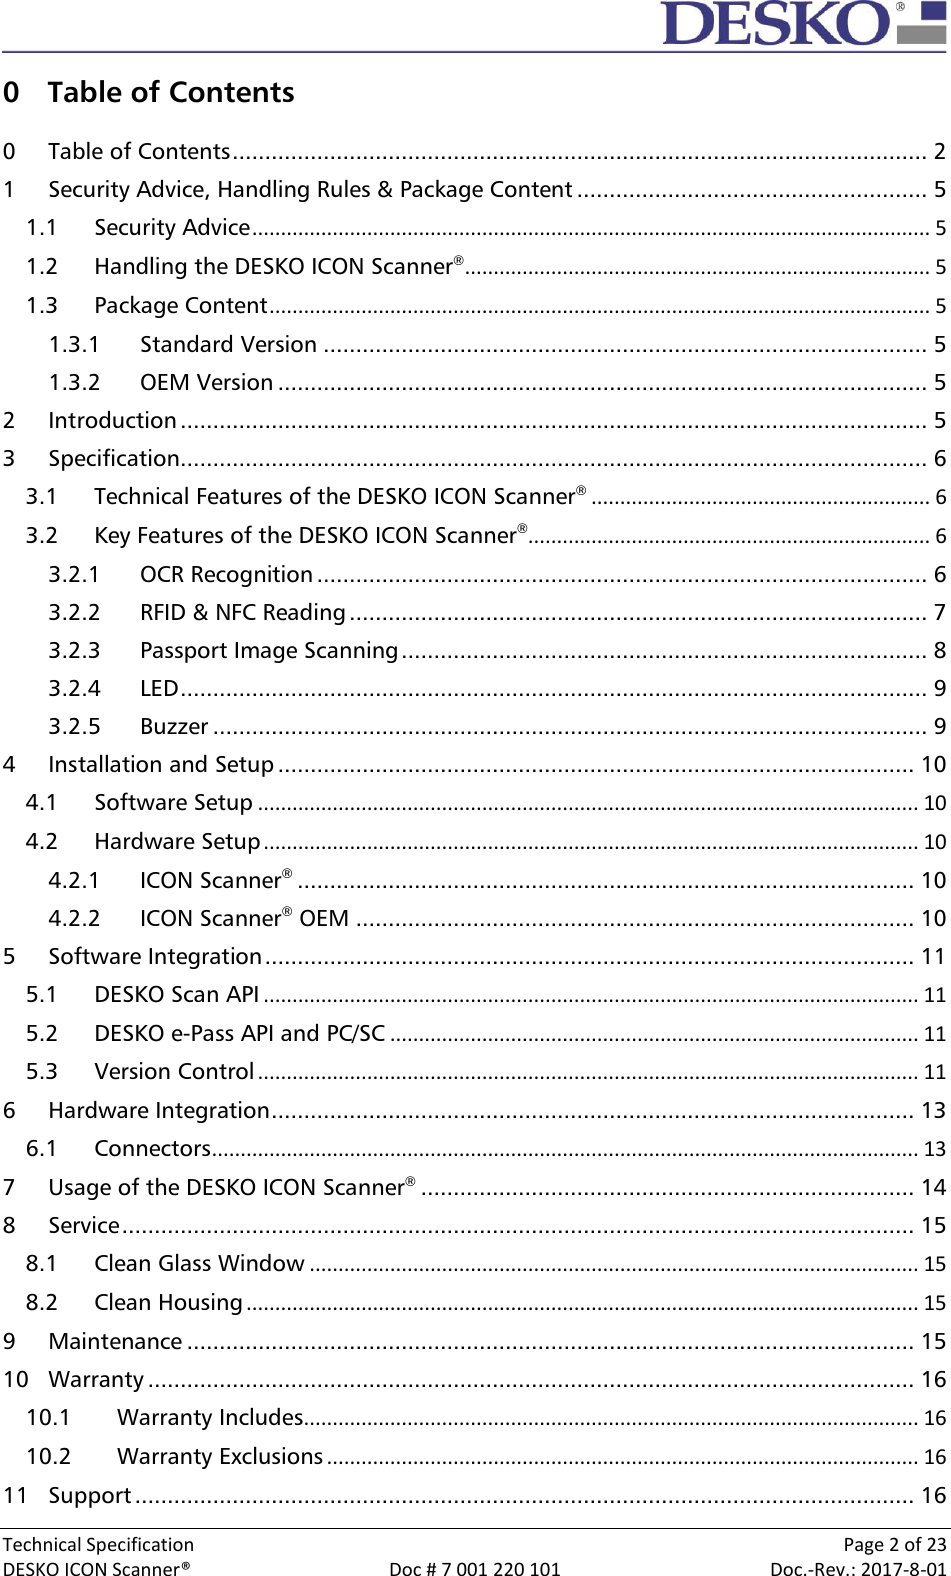  Technical Specification    Page 2 of 23 DESKO ICON Scanner®  Doc # 7 001 220 101  Doc.-Rev.: 2017-8-01  0 Table of Contents  0 Table of Contents ........................................................................................................... 2 1 Security Advice, Handling Rules &amp; Package Content ...................................................... 5 1.1 Security Advice ...................................................................................................................... 5 1.2 Handling the DESKO ICON Scanner® ................................................................................. 5 1.3 Package Content ................................................................................................................... 5 1.3.1 Standard Version ............................................................................................. 5 1.3.2 OEM Version .................................................................................................... 5 2 Introduction ................................................................................................................... 5 3 Specification ................................................................................................................... 6 3.1 Technical Features of the DESKO ICON Scanner® ........................................................... 6 3.2 Key Features of the DESKO ICON Scanner®...................................................................... 6 3.2.1 OCR Recognition .............................................................................................. 6 3.2.2 RFID &amp; NFC Reading ......................................................................................... 7 3.2.3 Passport Image Scanning ................................................................................. 8 3.2.4 LED ................................................................................................................... 9 3.2.5 Buzzer .............................................................................................................. 9 4 Installation and Setup .................................................................................................. 10 4.1 Software Setup ................................................................................................................... 10 4.2 Hardware Setup .................................................................................................................. 10 4.2.1 ICON Scanner® ............................................................................................... 10 4.2.2 ICON Scanner® OEM ...................................................................................... 10 5 Software Integration .................................................................................................... 11 5.1 DESKO Scan API .................................................................................................................. 11 5.2 DESKO e-Pass API and PC/SC ............................................................................................ 11 5.3 Version Control ................................................................................................................... 11 6 Hardware Integration ................................................................................................... 13 6.1 Connectors ........................................................................................................................... 13 7 Usage of the DESKO ICON Scanner® ............................................................................ 14 8 Service .......................................................................................................................... 15 8.1 Clean Glass Window .......................................................................................................... 15 8.2 Clean Housing ..................................................................................................................... 15 9 Maintenance ................................................................................................................ 15 10 Warranty ...................................................................................................................... 16 10.1 Warranty Includes ........................................................................................................... 16 10.2 Warranty Exclusions ....................................................................................................... 16 11 Support ........................................................................................................................ 16 